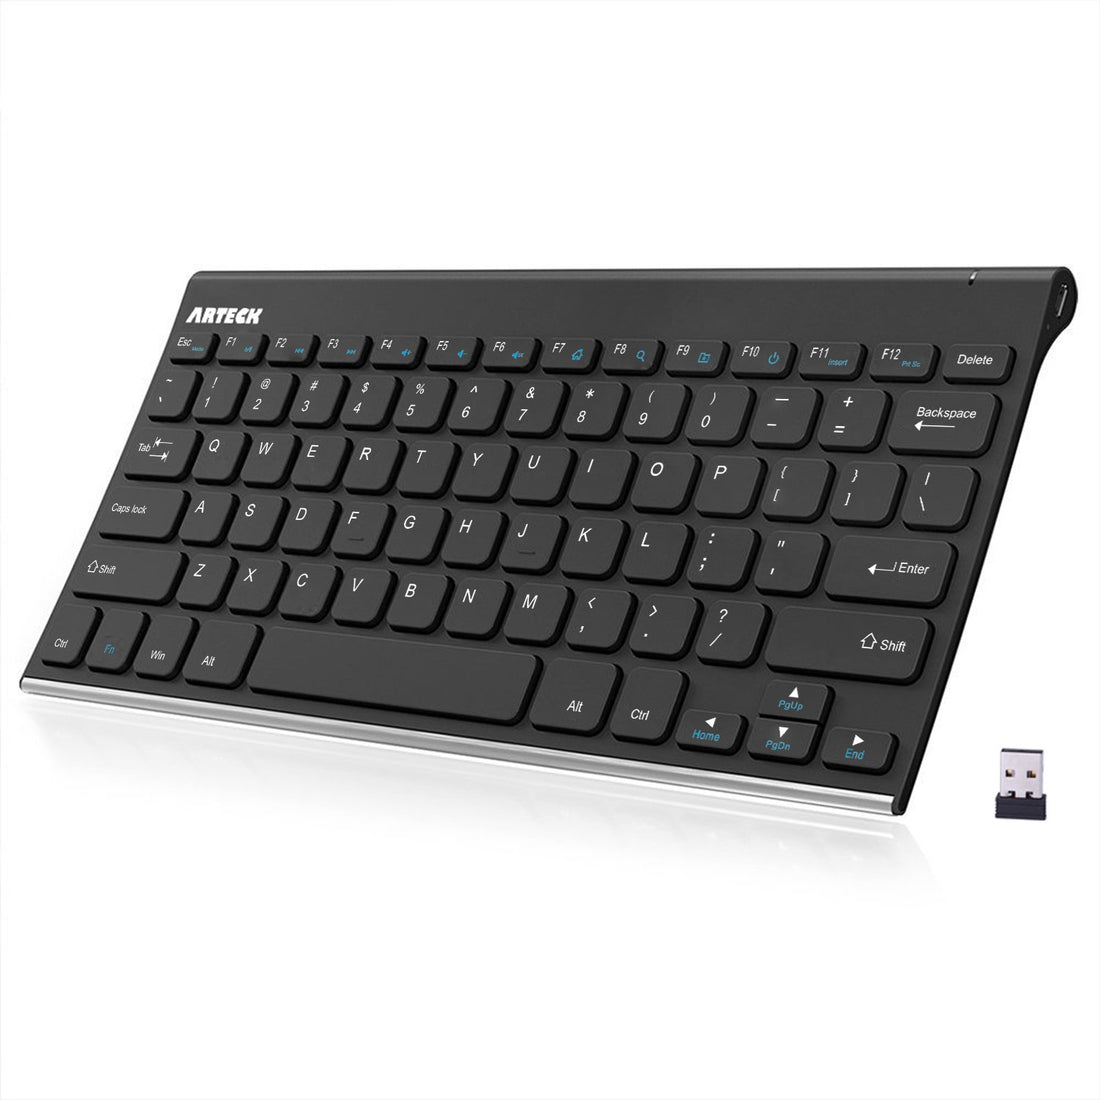 Arteck 2.4G Wireless Keyboard Stainless Steel Ultra Slim Full Size Keyboard for Computer / Desktop / PC / Laptop / Surface / Smart TV and Windows 10 / 8 / 7 / Vista / XP Built in Rechargeable Battery